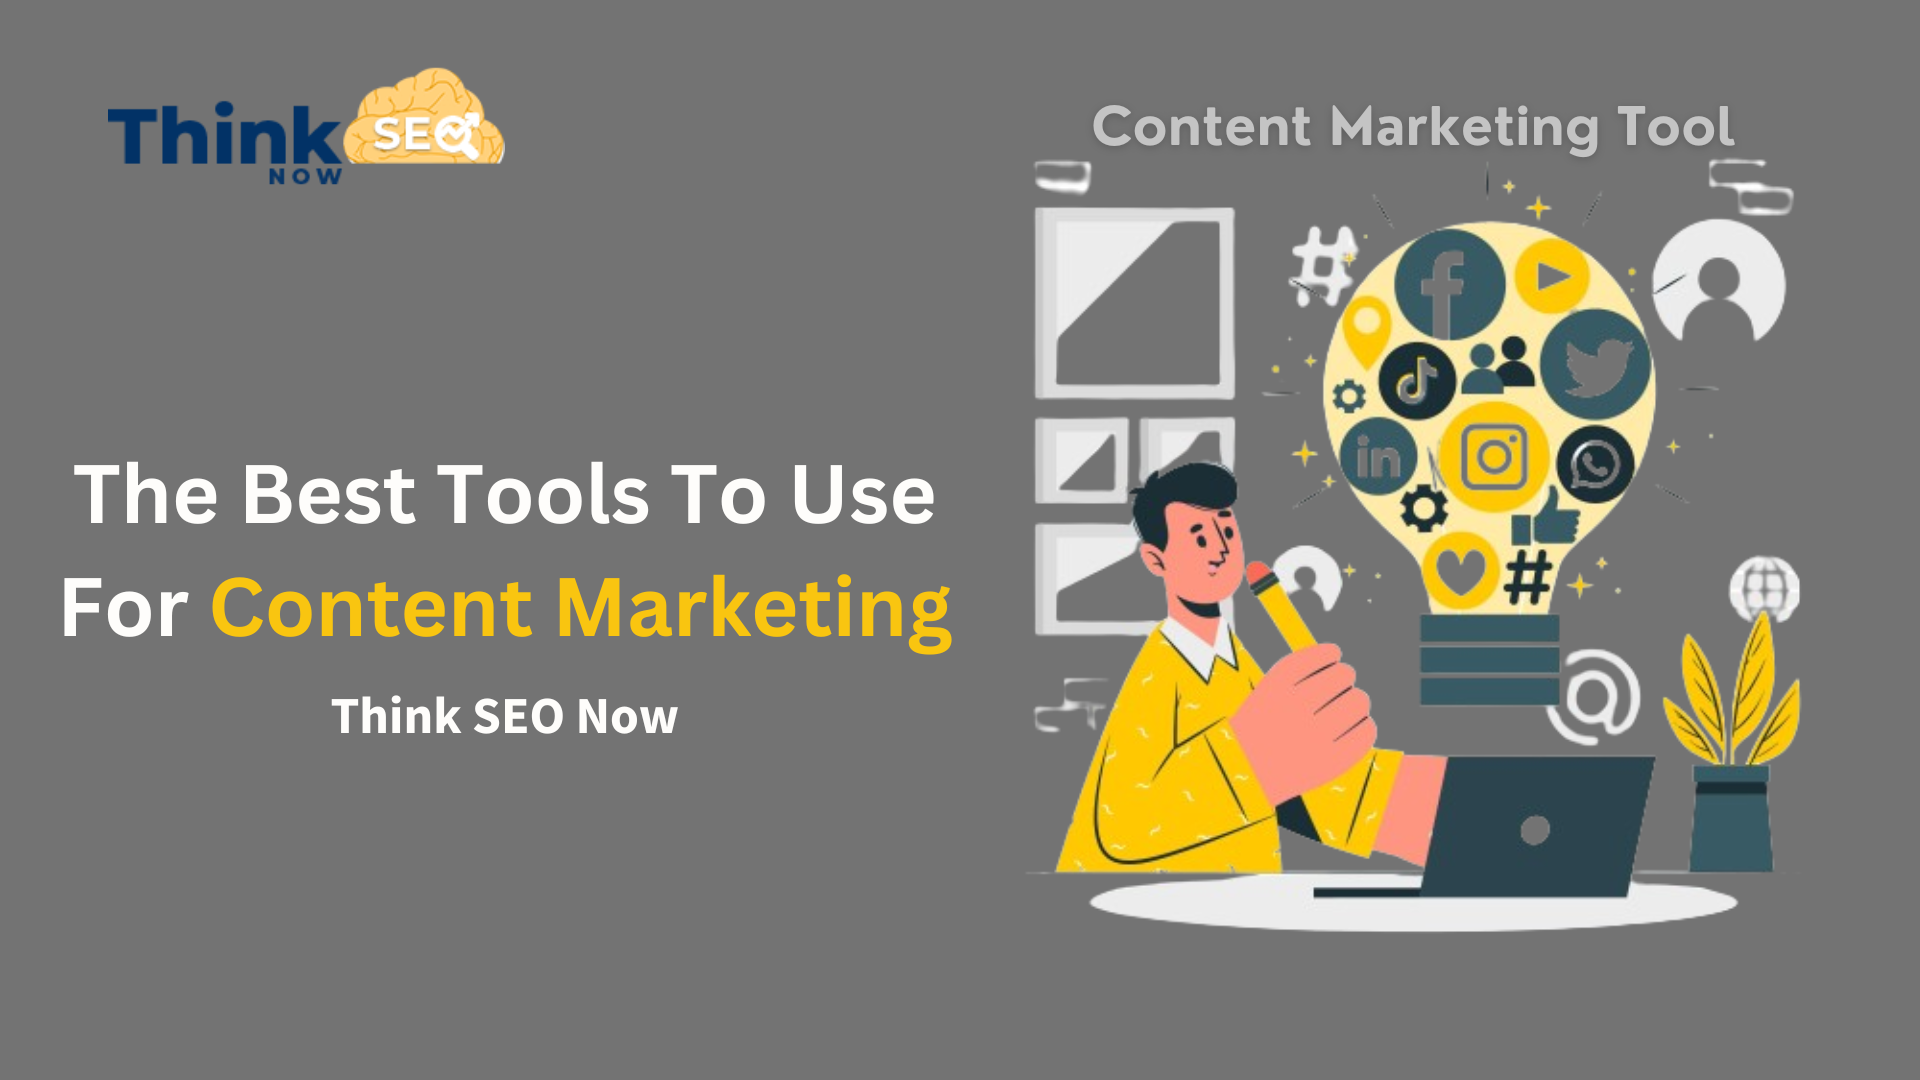 What Are The Best Tools To Use For Content Marketing?